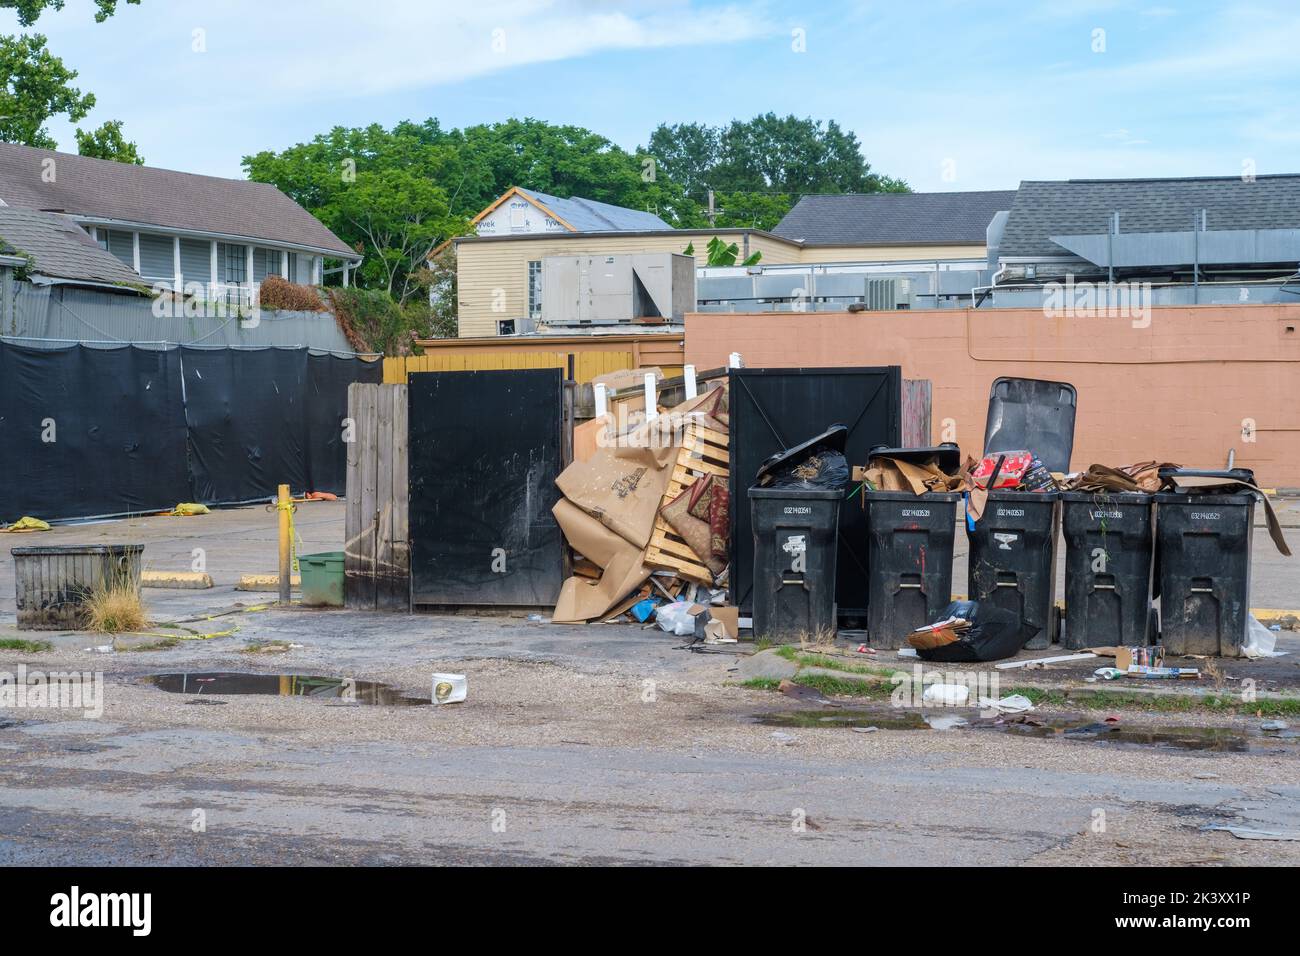 NEW ORLEANS, LA, USA - JULY 3, 2022: Overflowing trash in violation of city ordinances at Fresco Cafe and Pizzeria on Maple Street Stock Photo